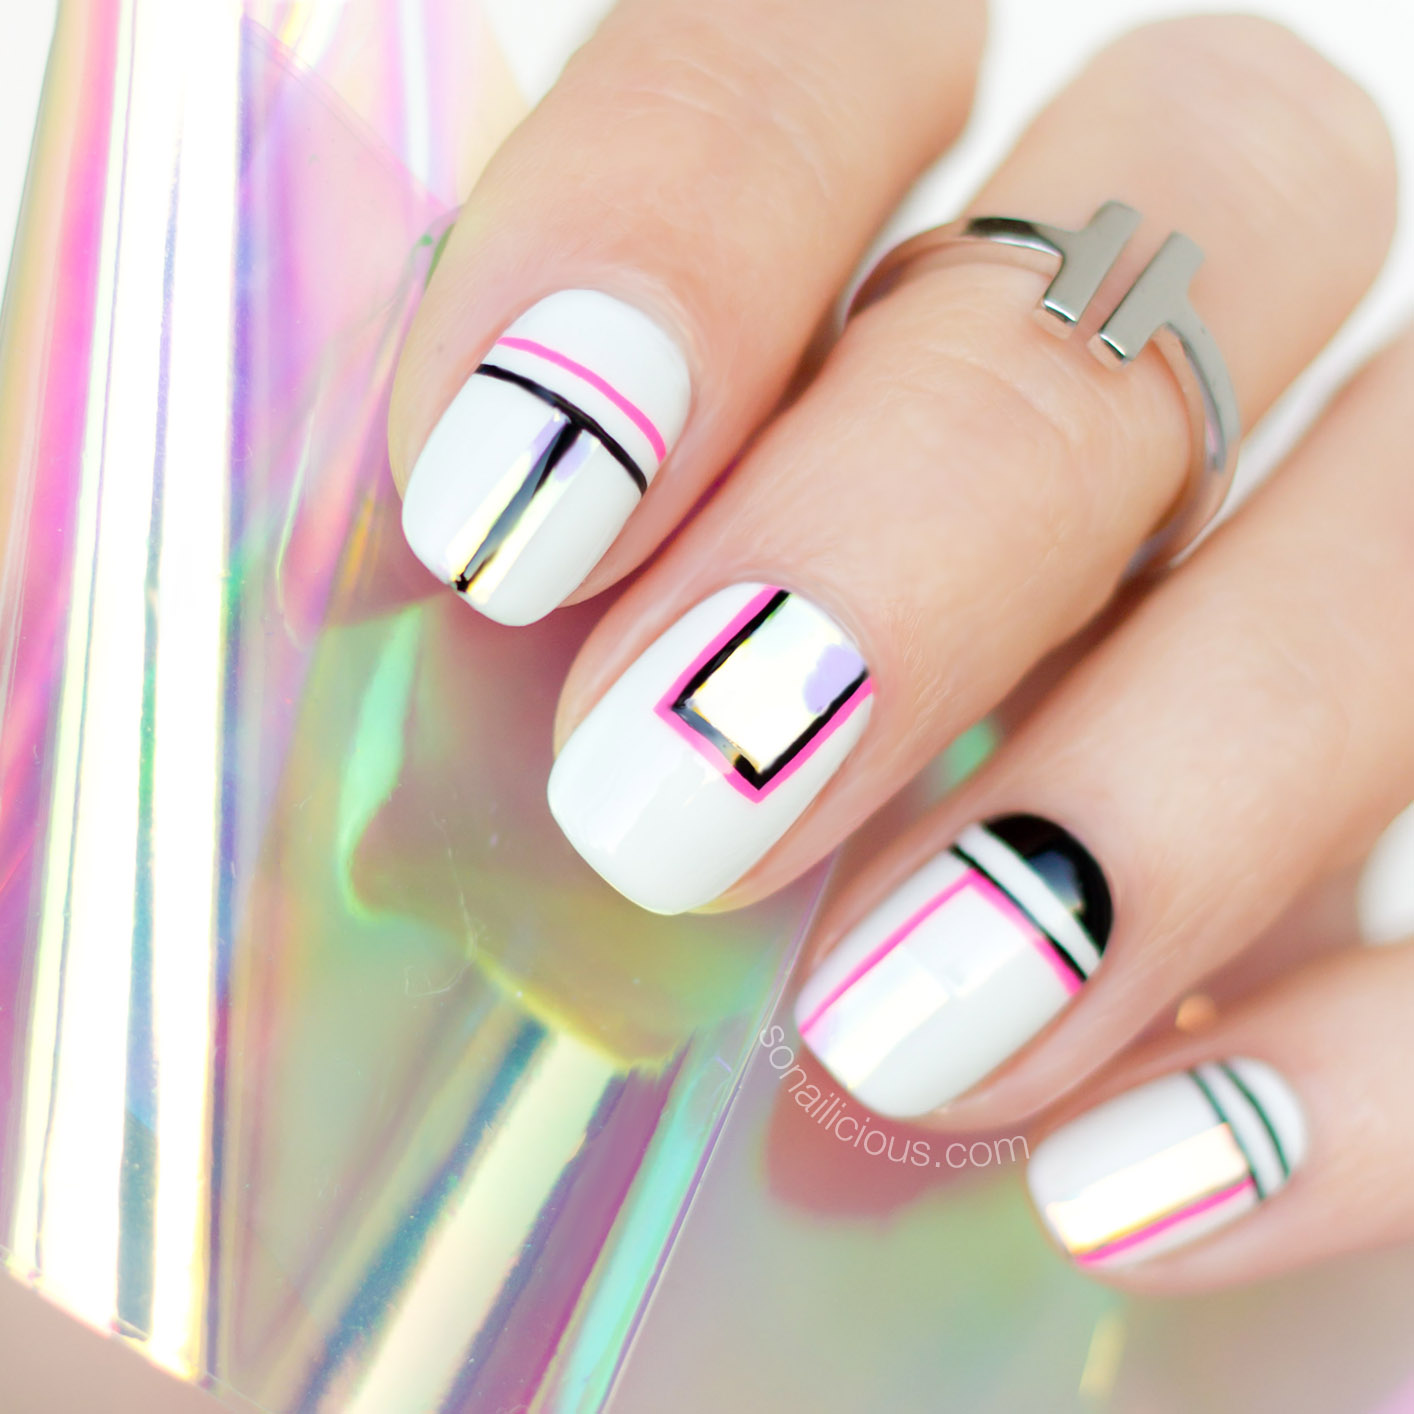 15 Knockout Nail Art Designs for Short Nails - (Page 2)